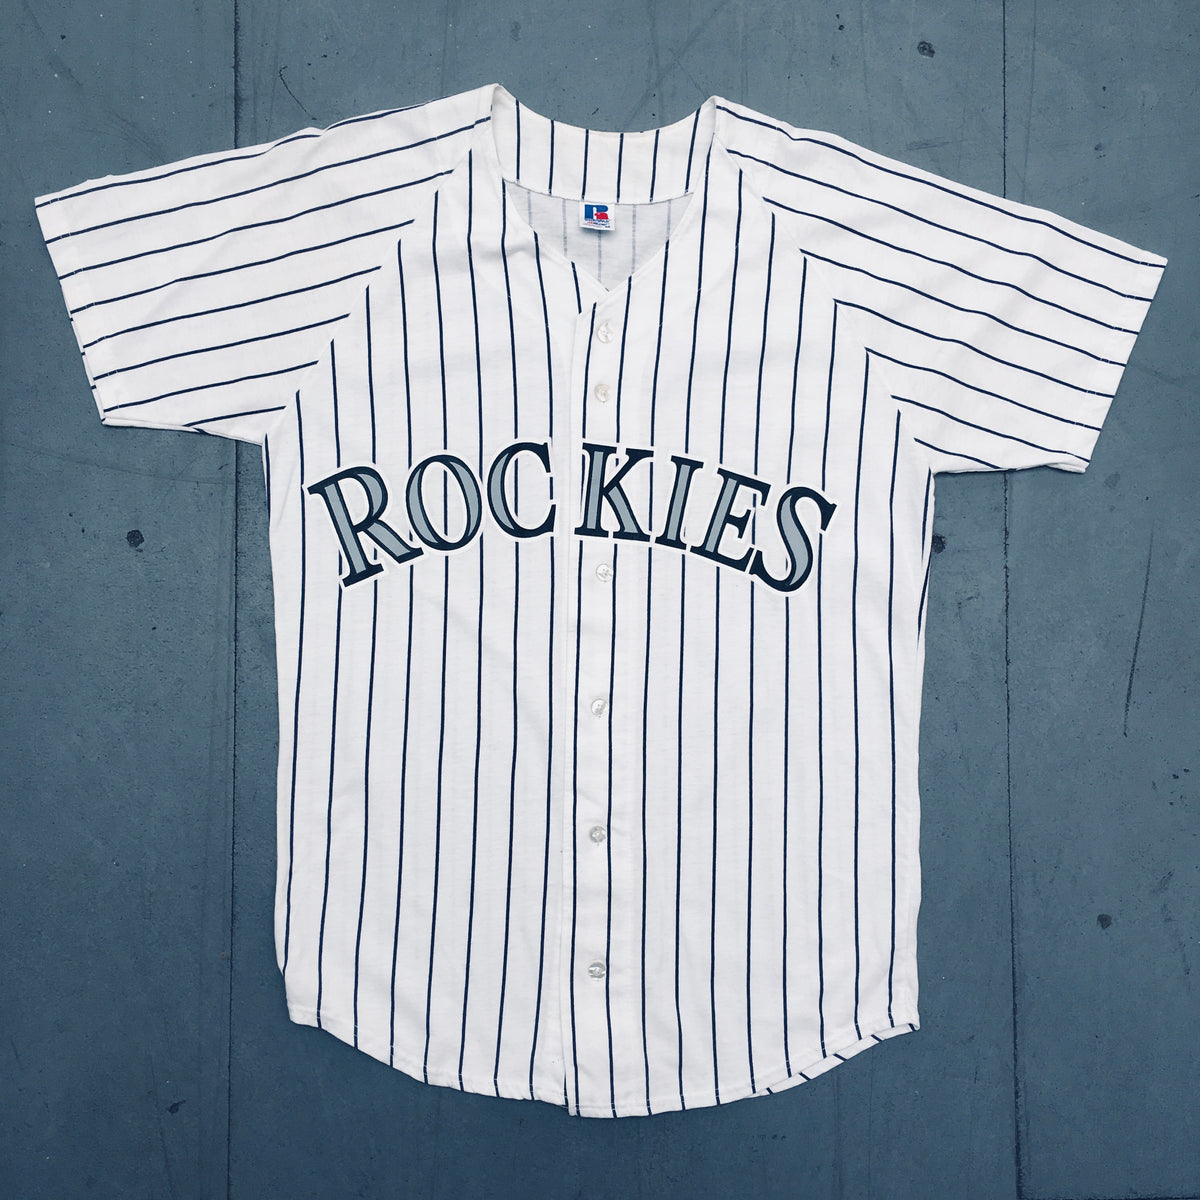 Russell Athletic Mets Jersey -  Denmark